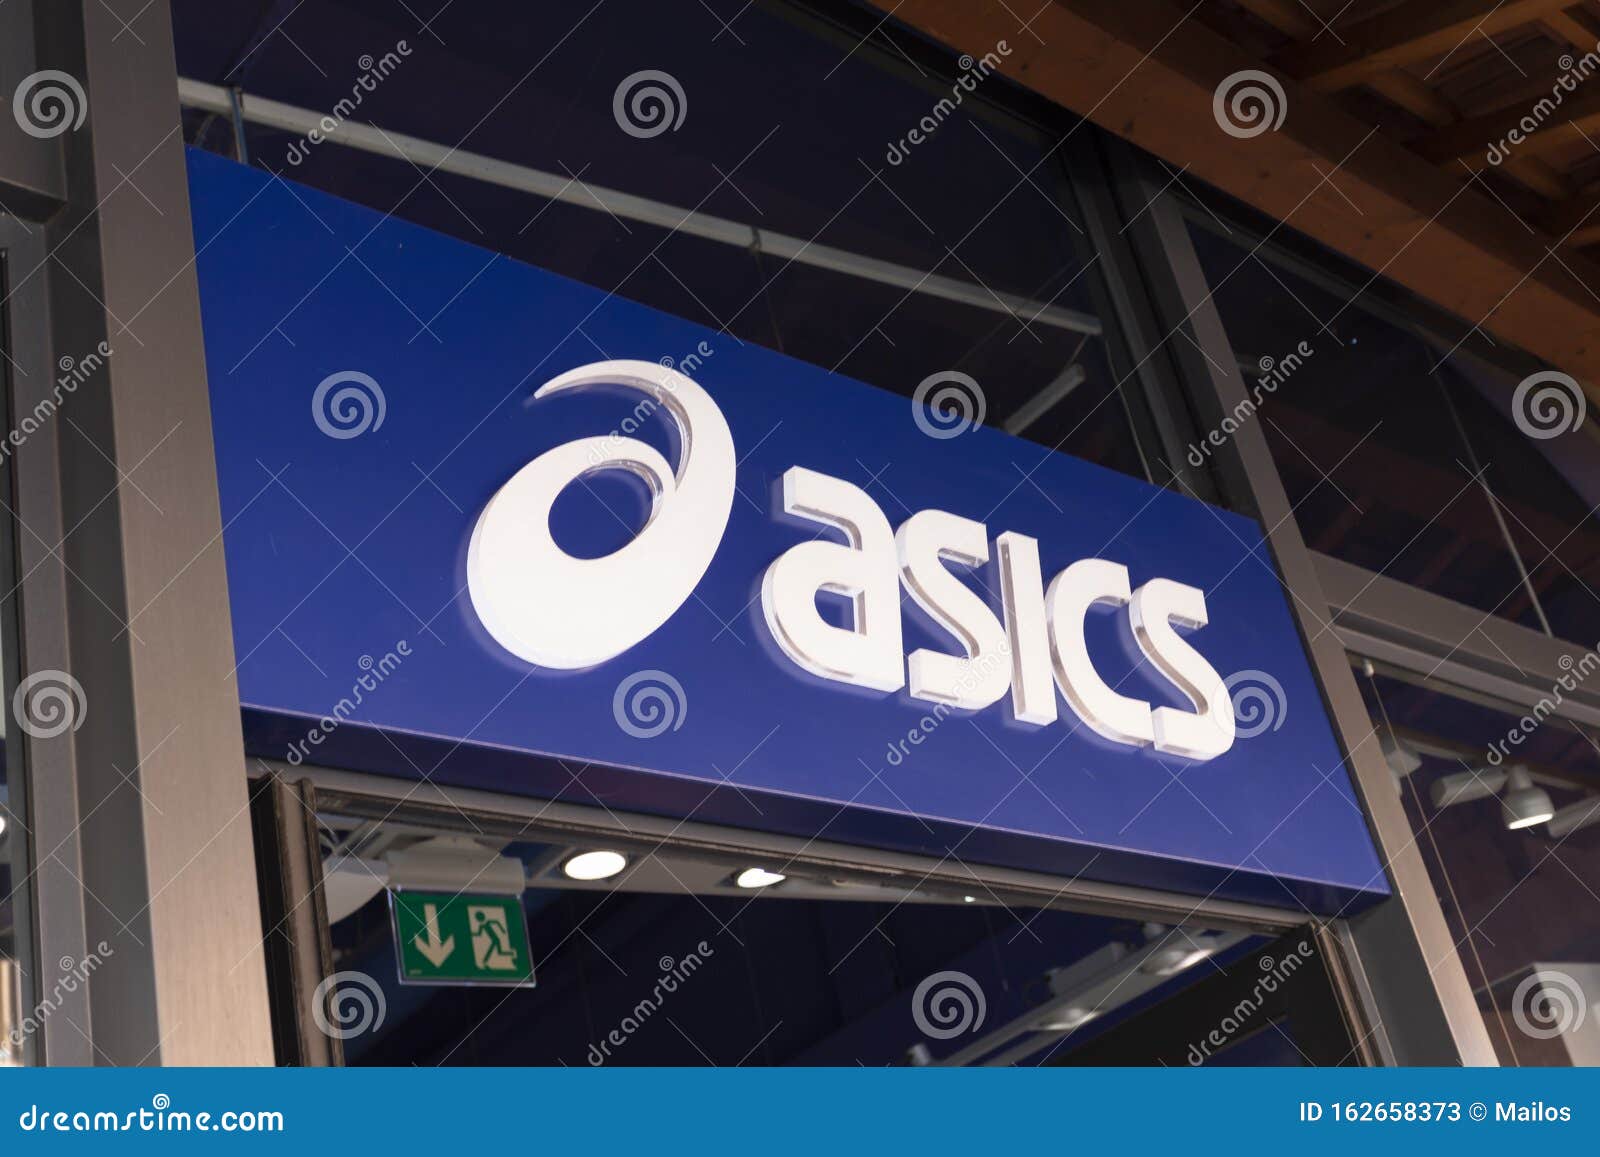 Valdichiana Outlet Italy Closeup of the Asics Lettering and Logo Its Facade Editorial Stock Photo - Image of town, exterior: 162658373